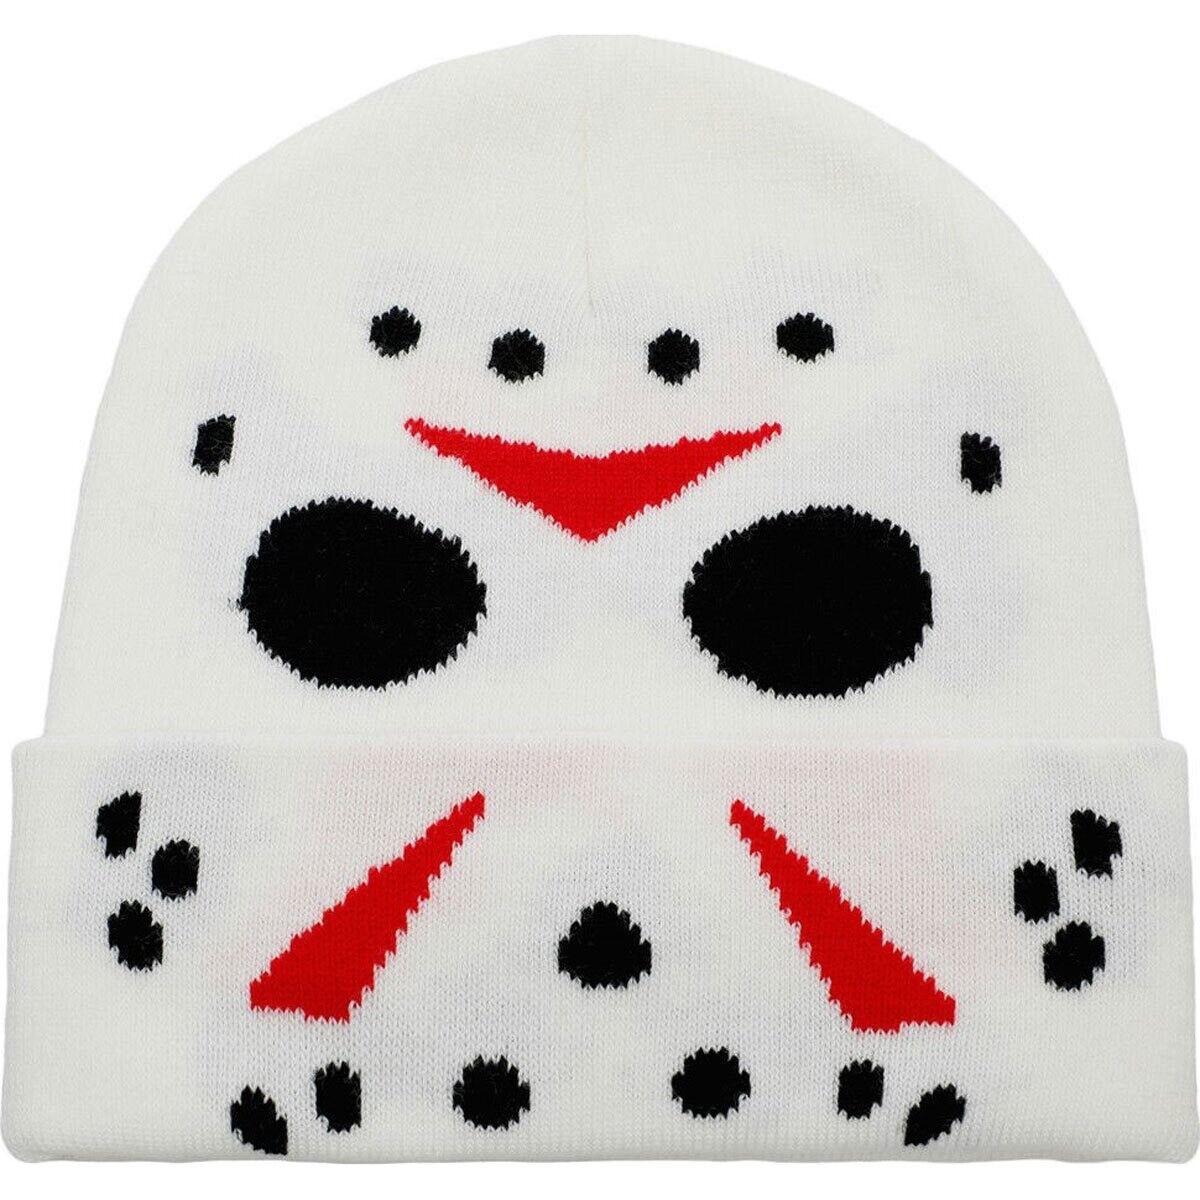 Bioworld • Friday the 13th • Glow-in-the-Dark • Beanie • One Size • Ships Free